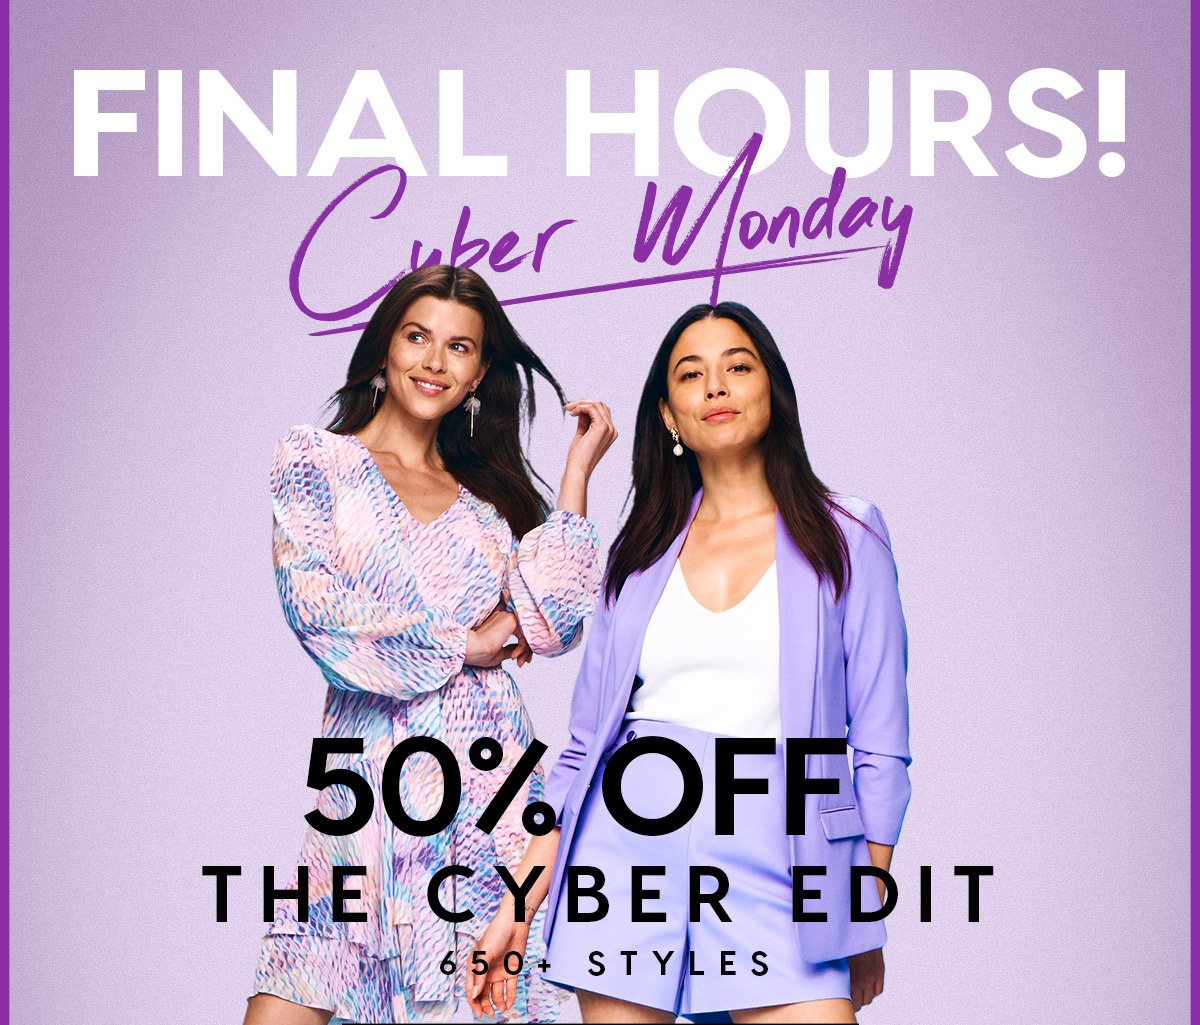 FINAL HOURS Cyber Monday Online Only 50% Off The Cyber Edit 650+ Styles